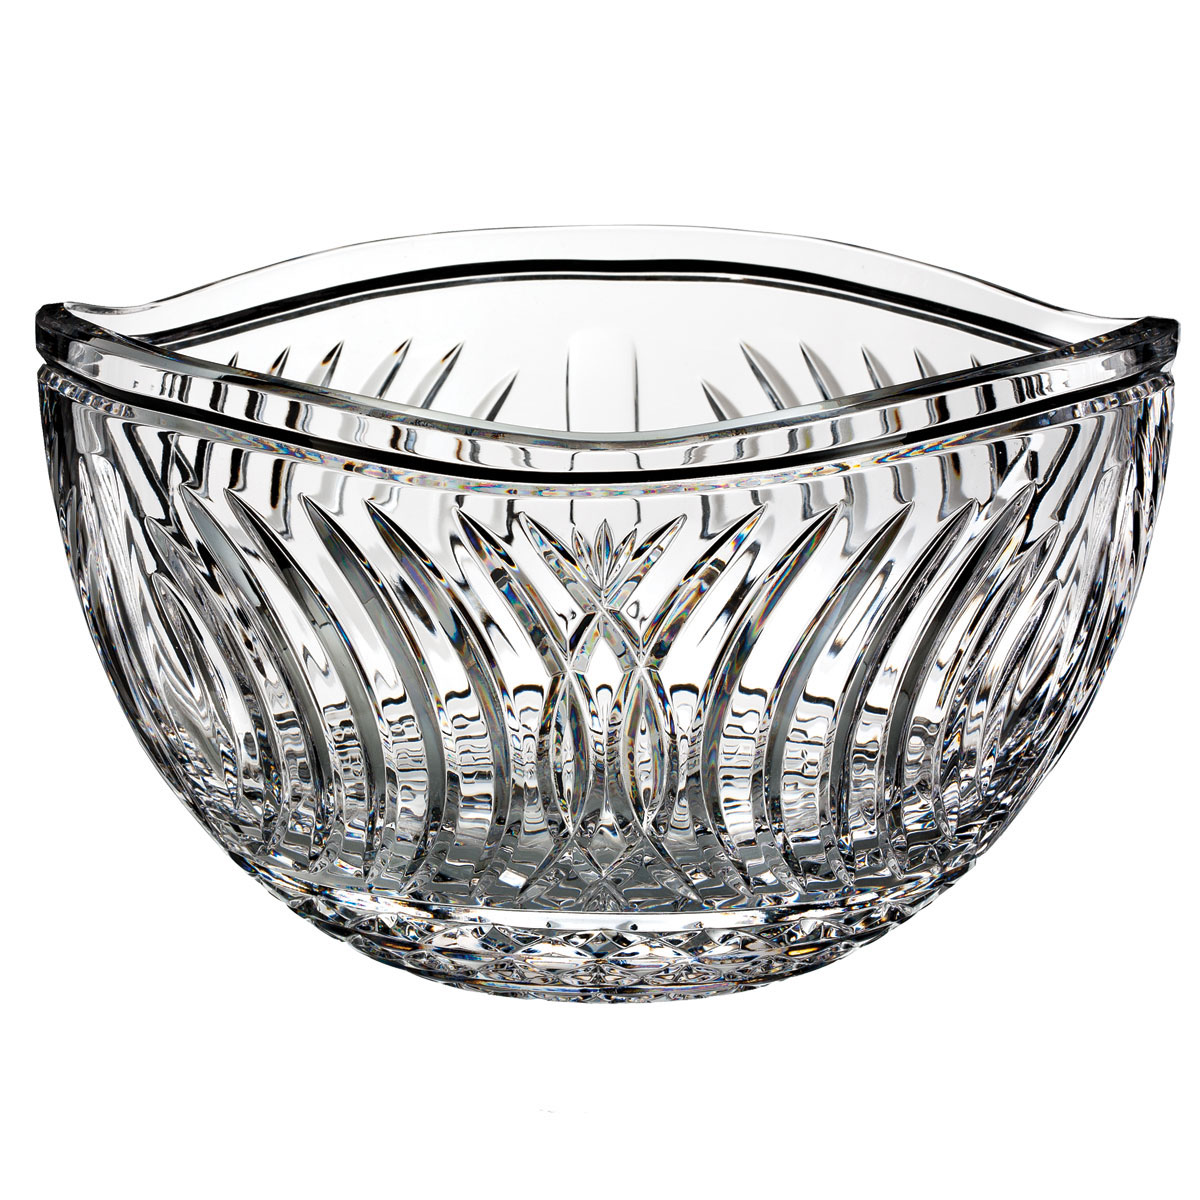 Waterford Crystal, House of Waterford Waves of Tramore 10" Crystal Bowl